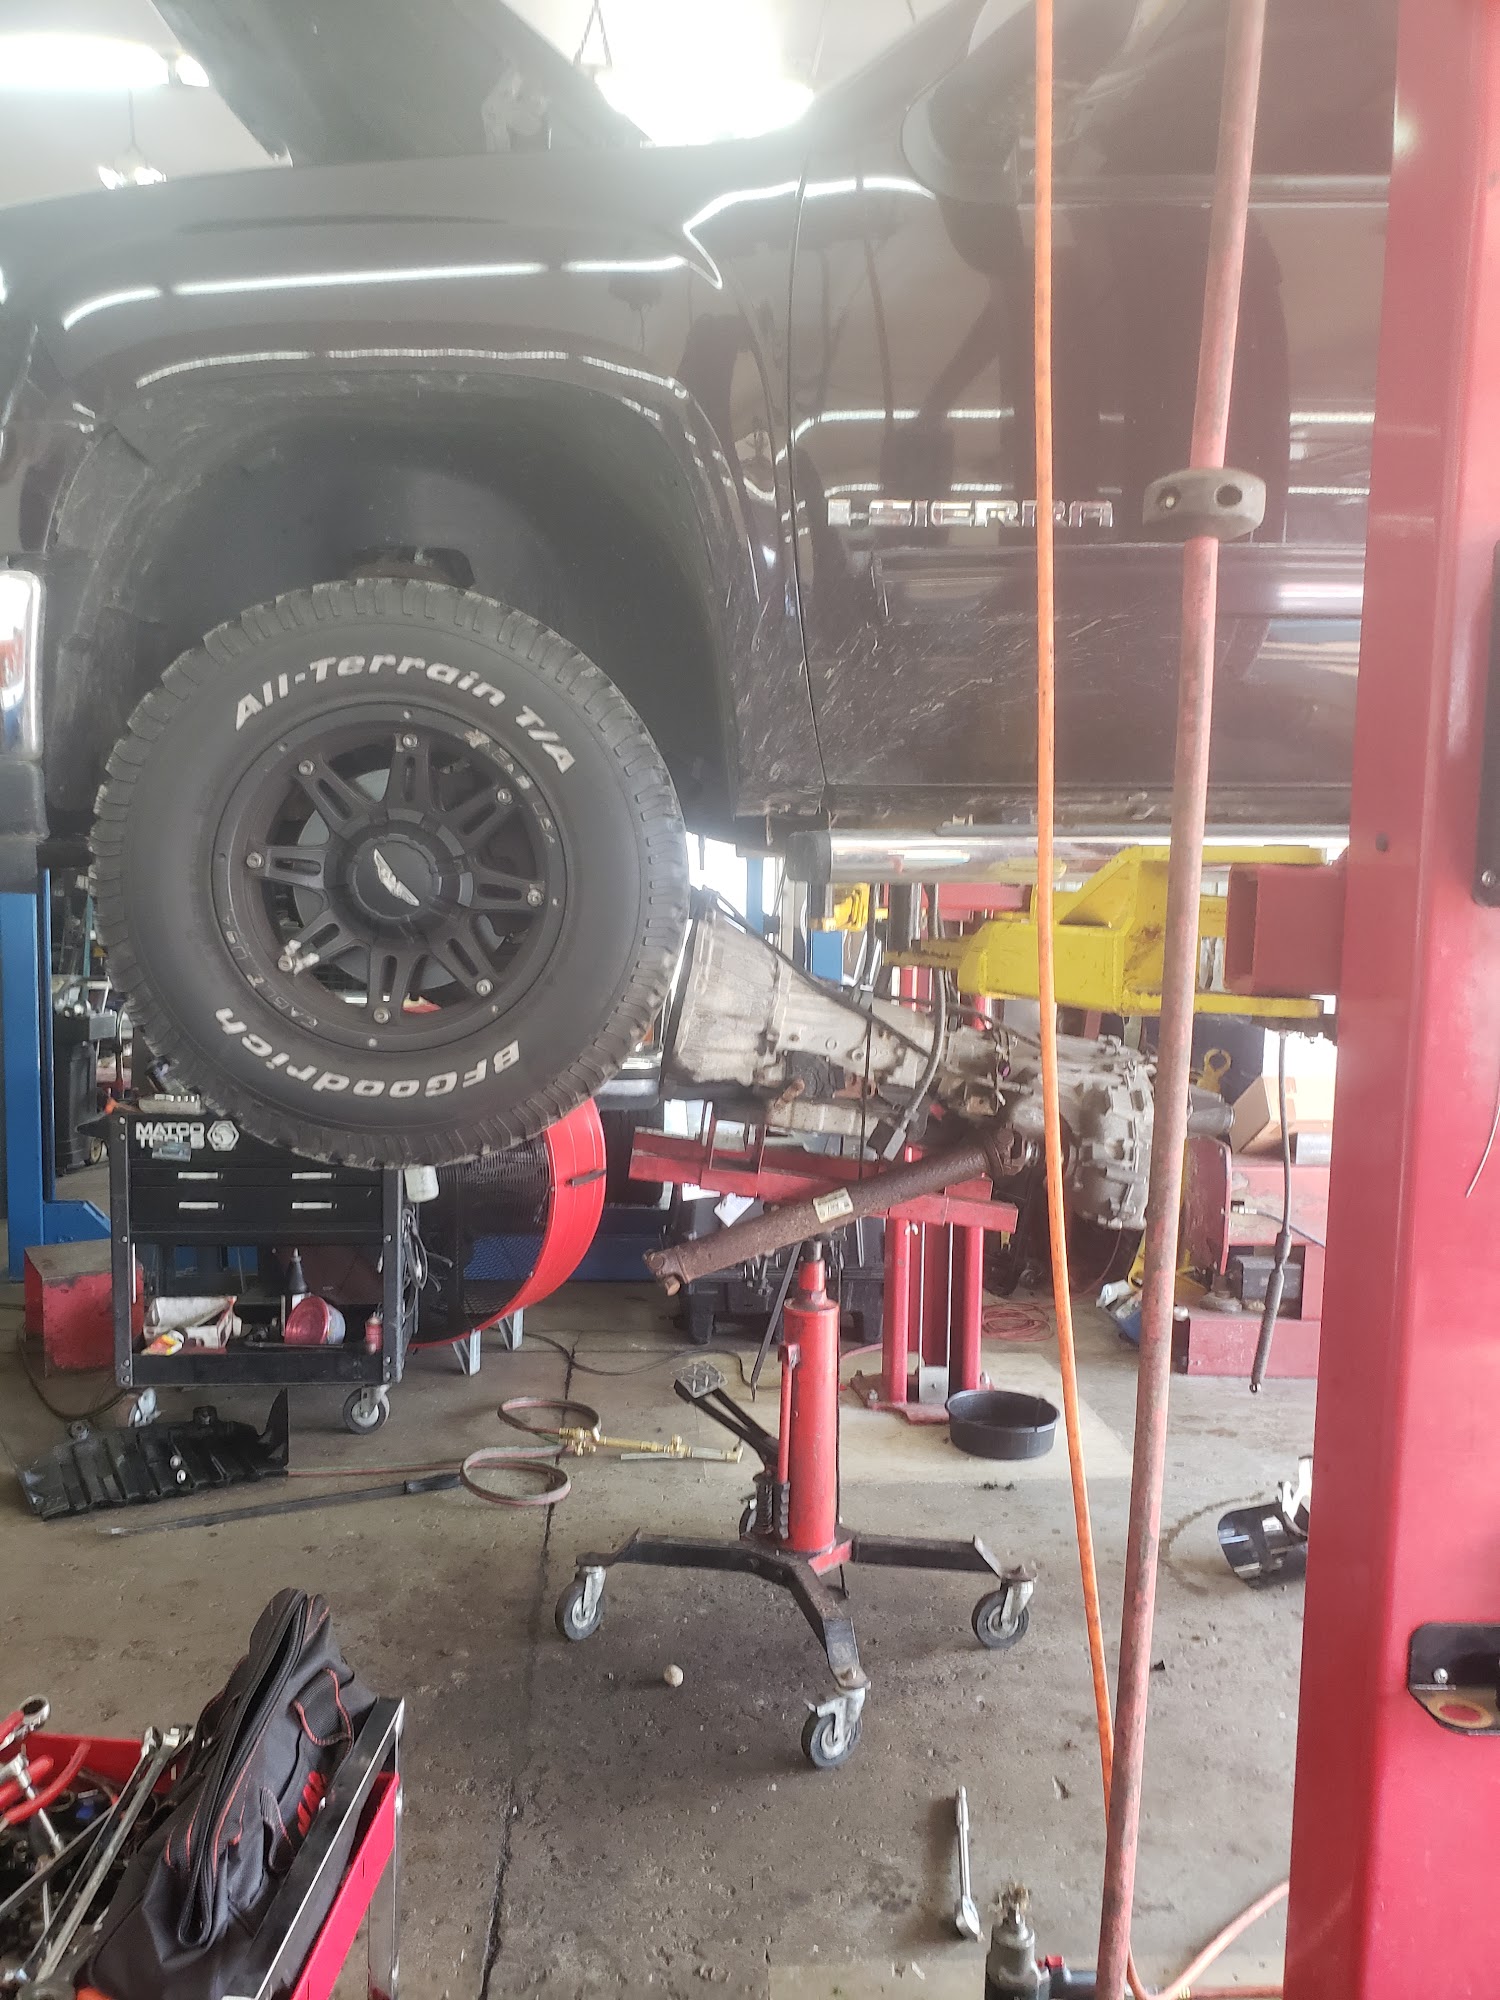 Muffler Brothers Auto Service - Huber Heights